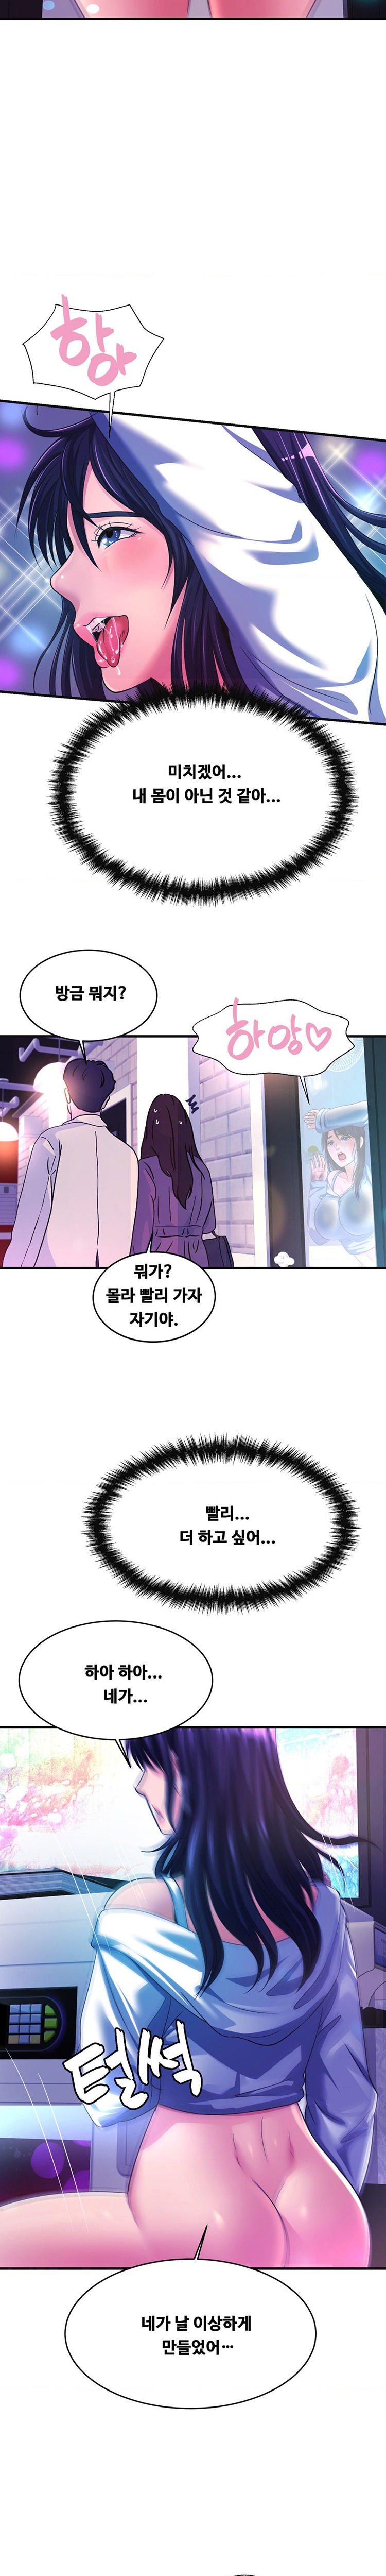 Secret Affection Raw - Chapter 10 Page 9